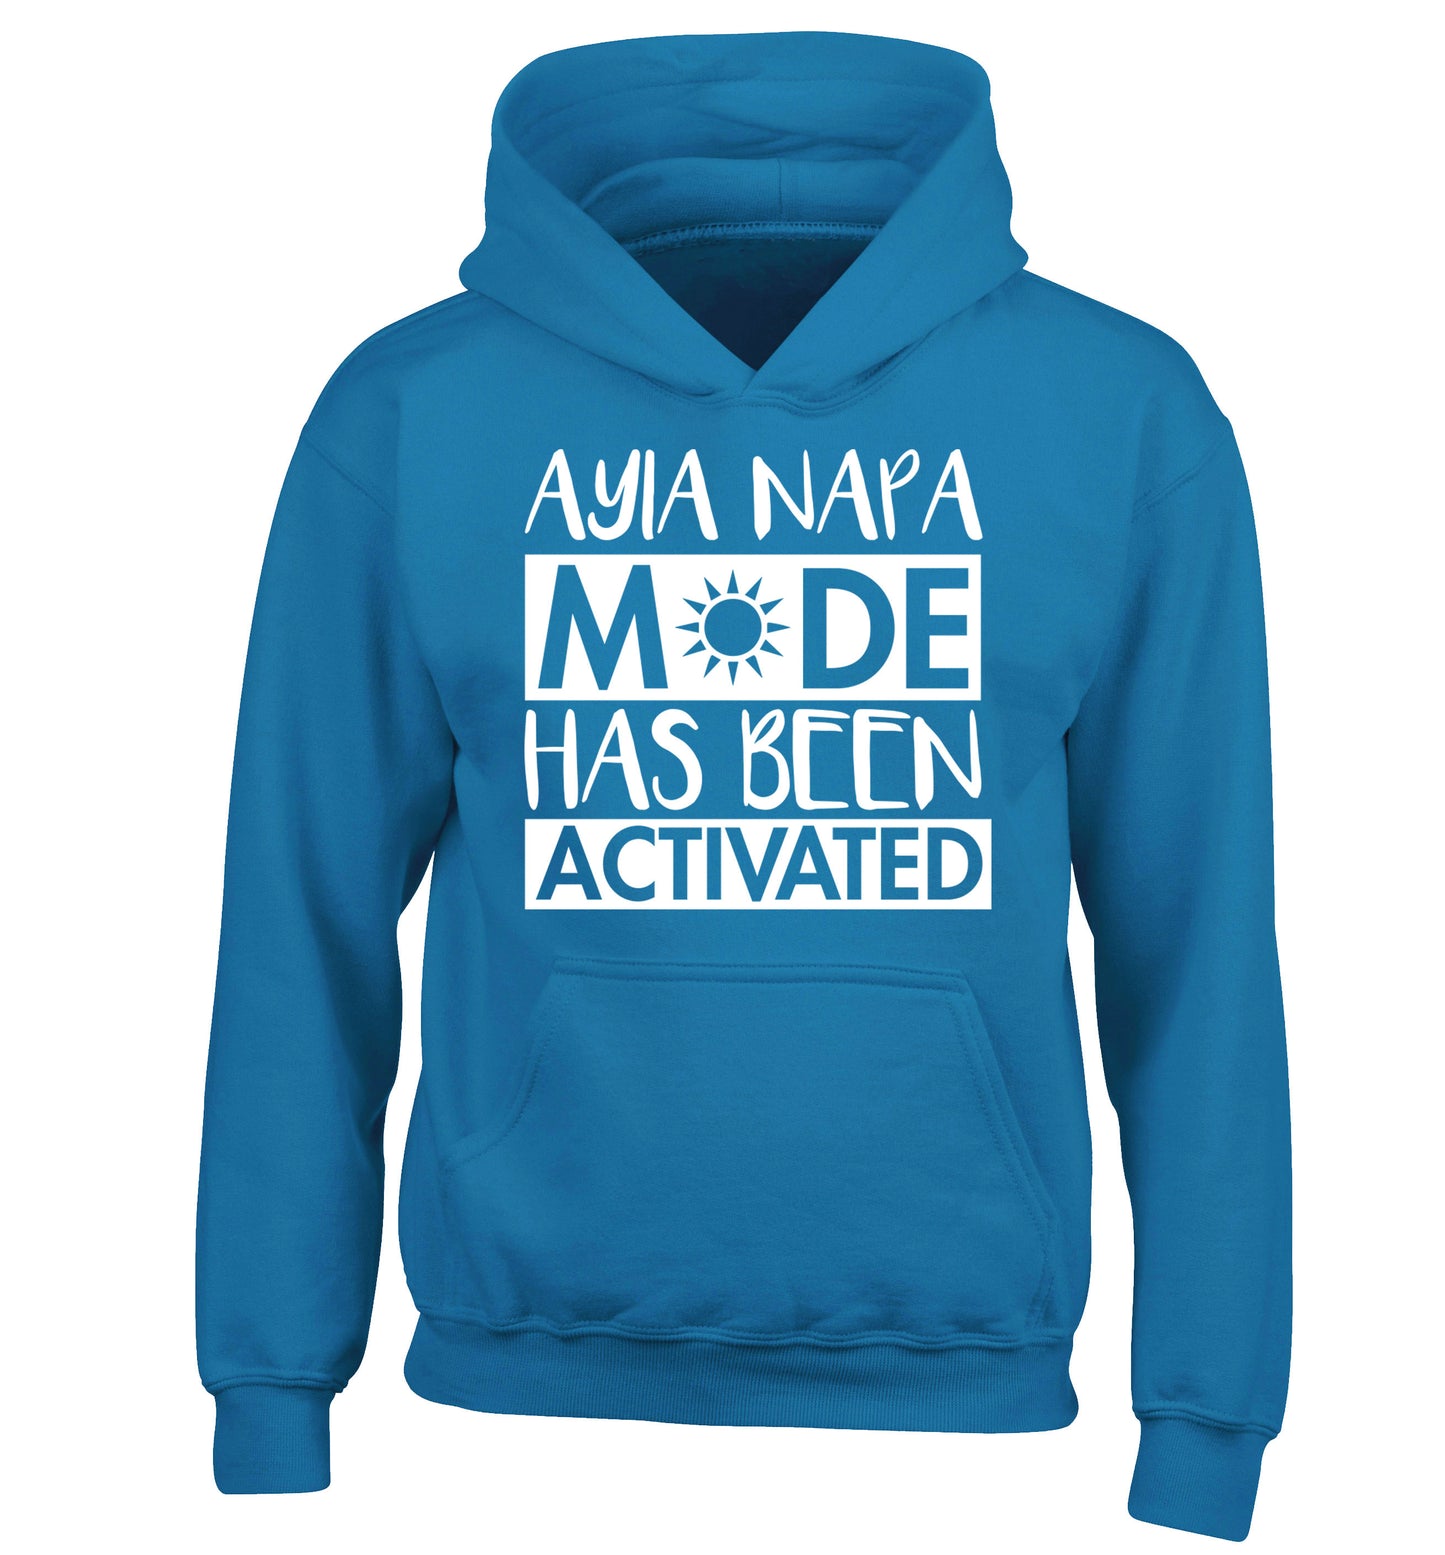 Aiya Napa mode has been activated children's blue hoodie 12-14 Years